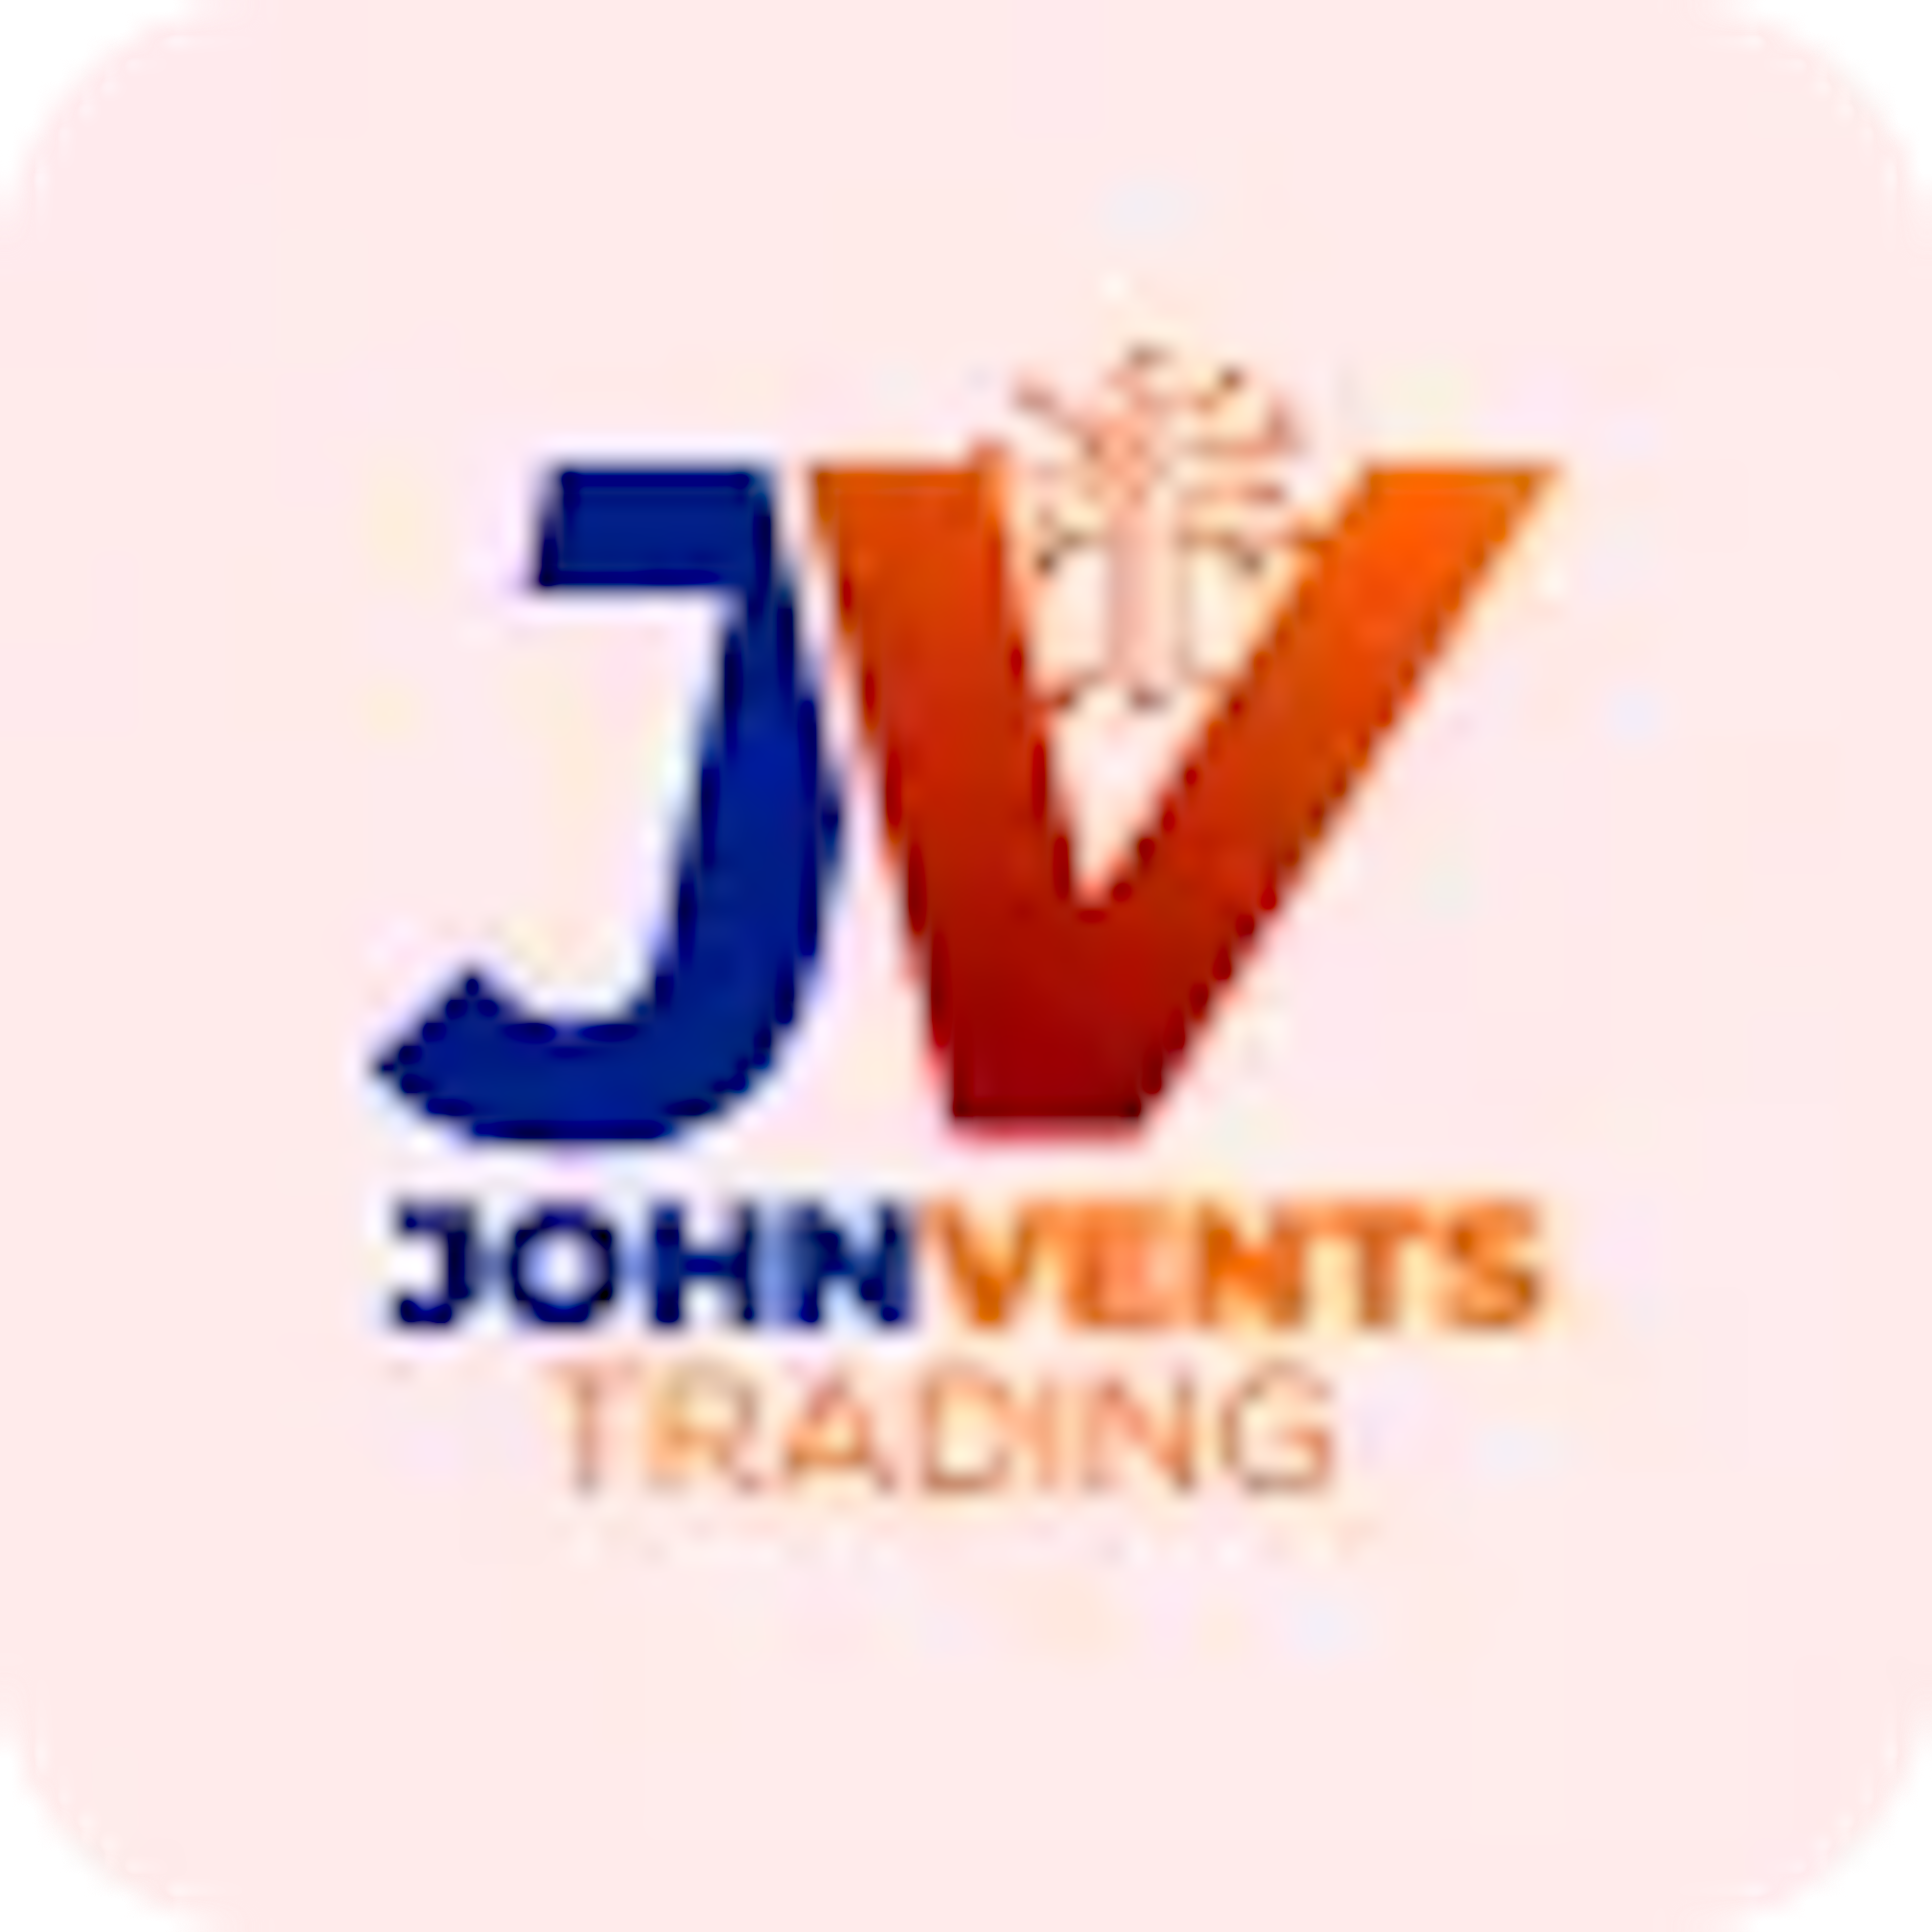 Johnvents Trading